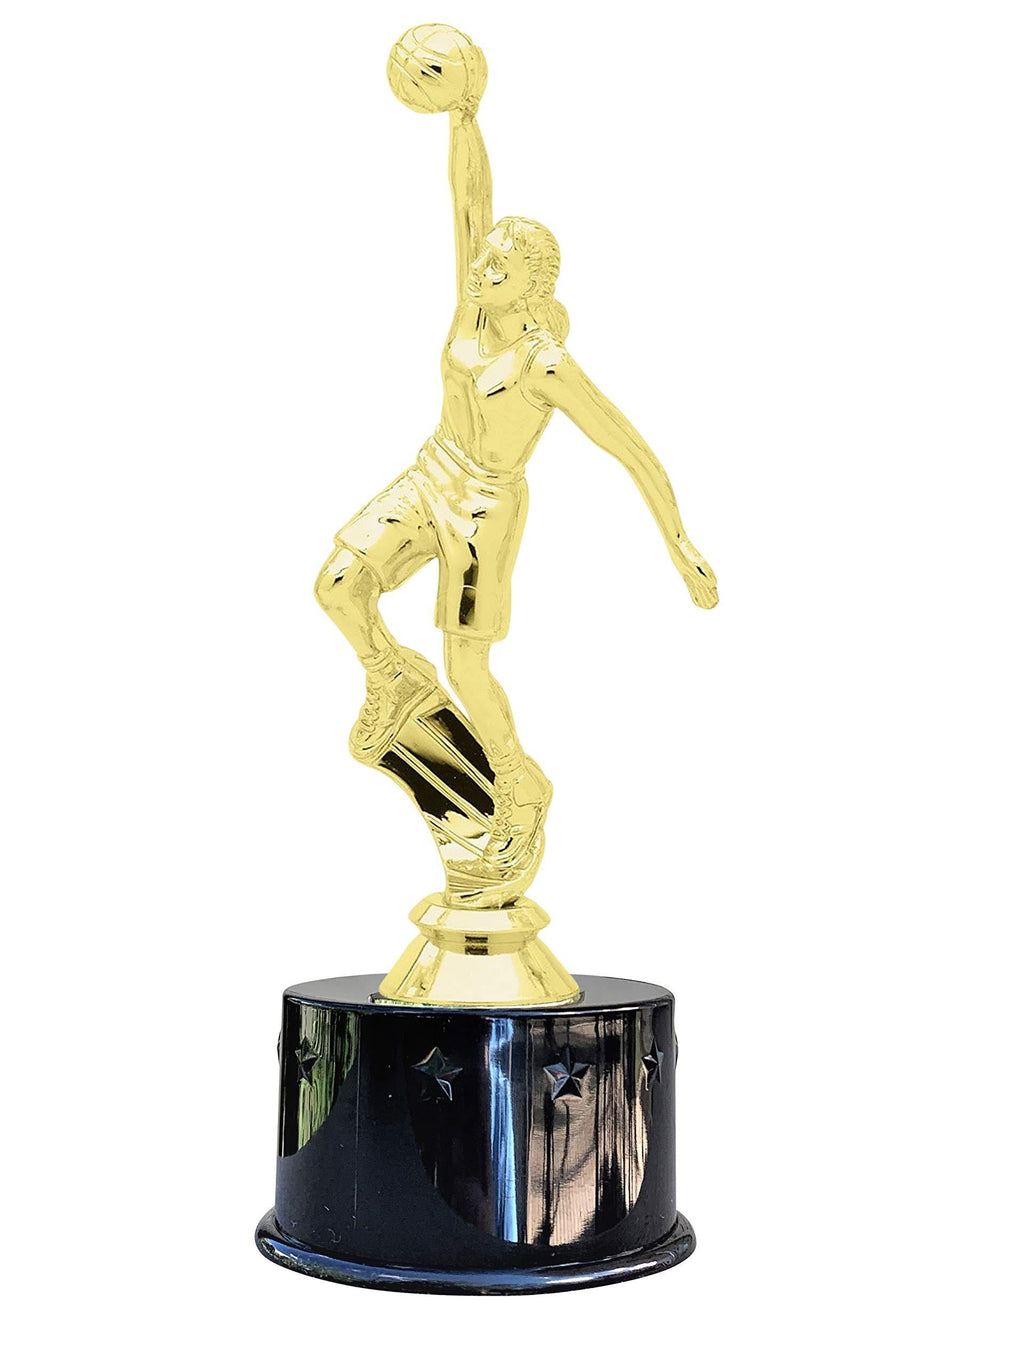 Express Medals Female Girls Dunk Basketball Award Trophy Party Favor Gift Prize Including 4 Gold Color Decals to Custom Personalize The Black Base - BeesActive Australia